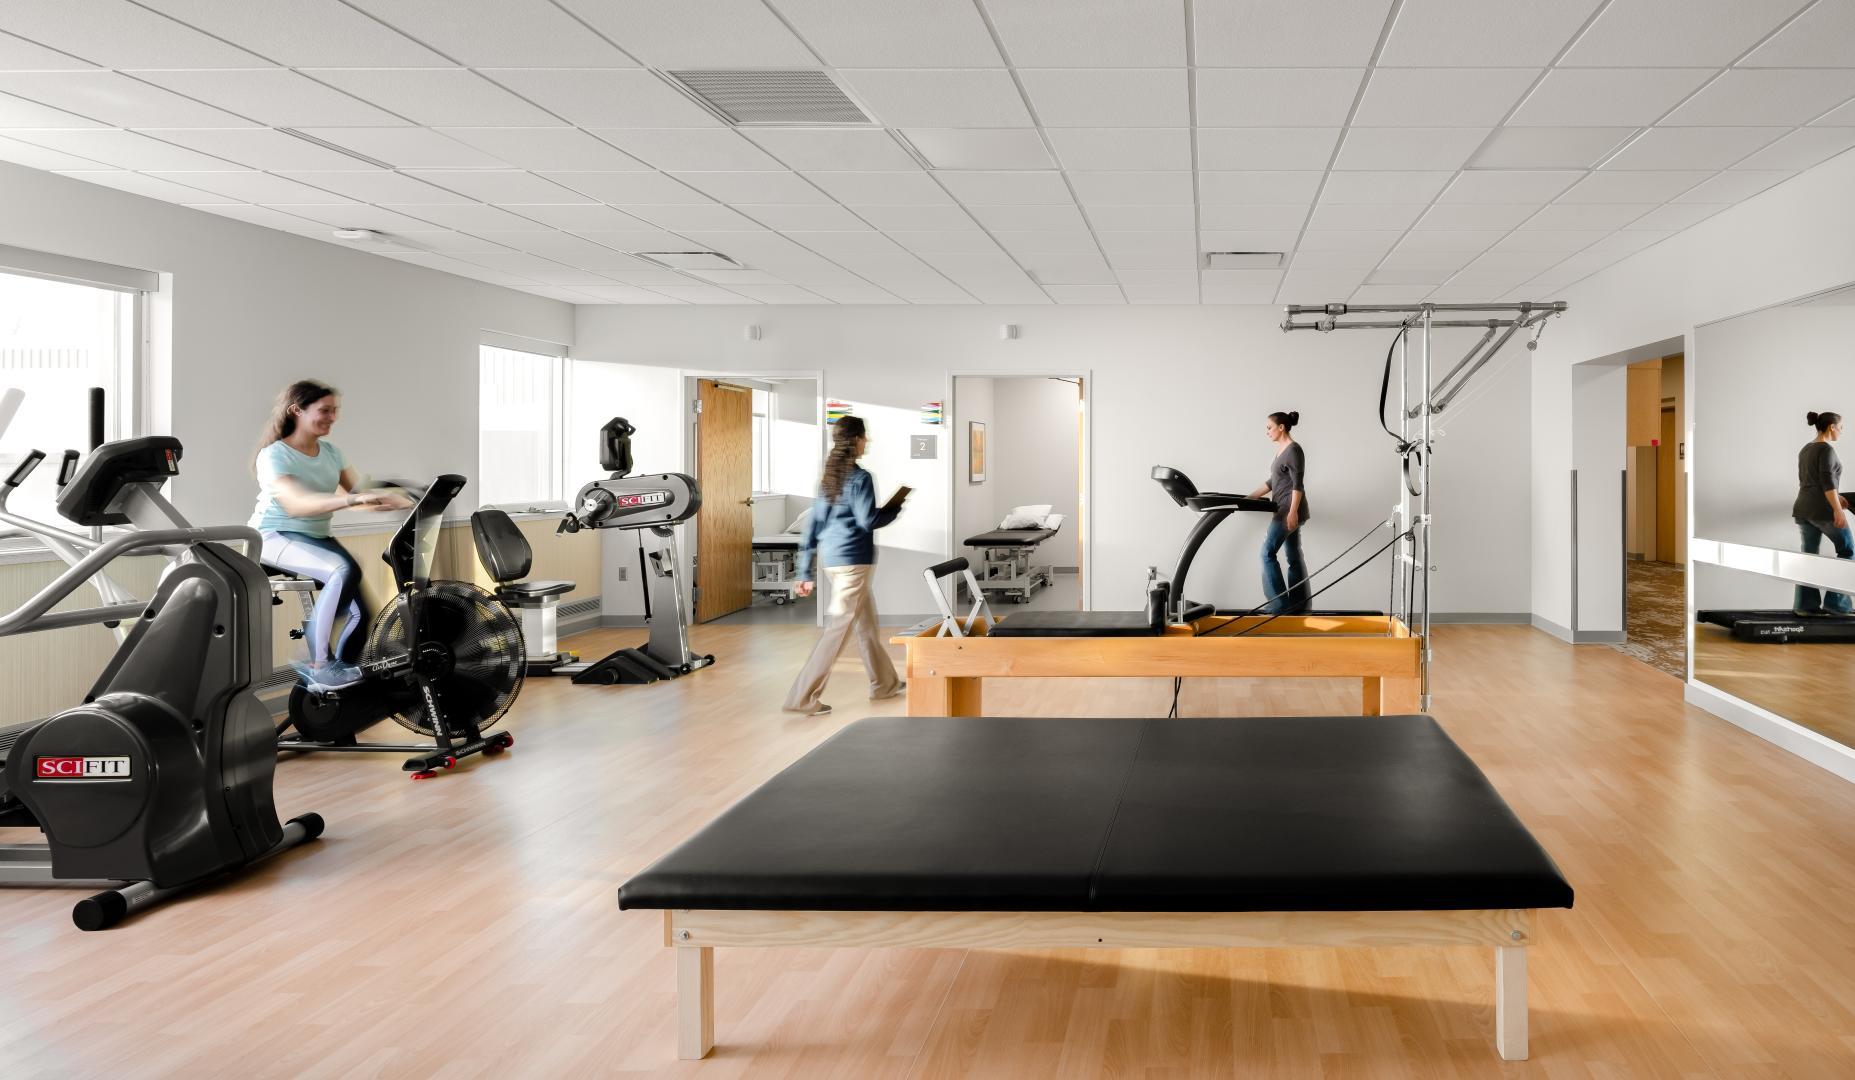 Physical therapy room with multiple exercise machines and patients exercising.